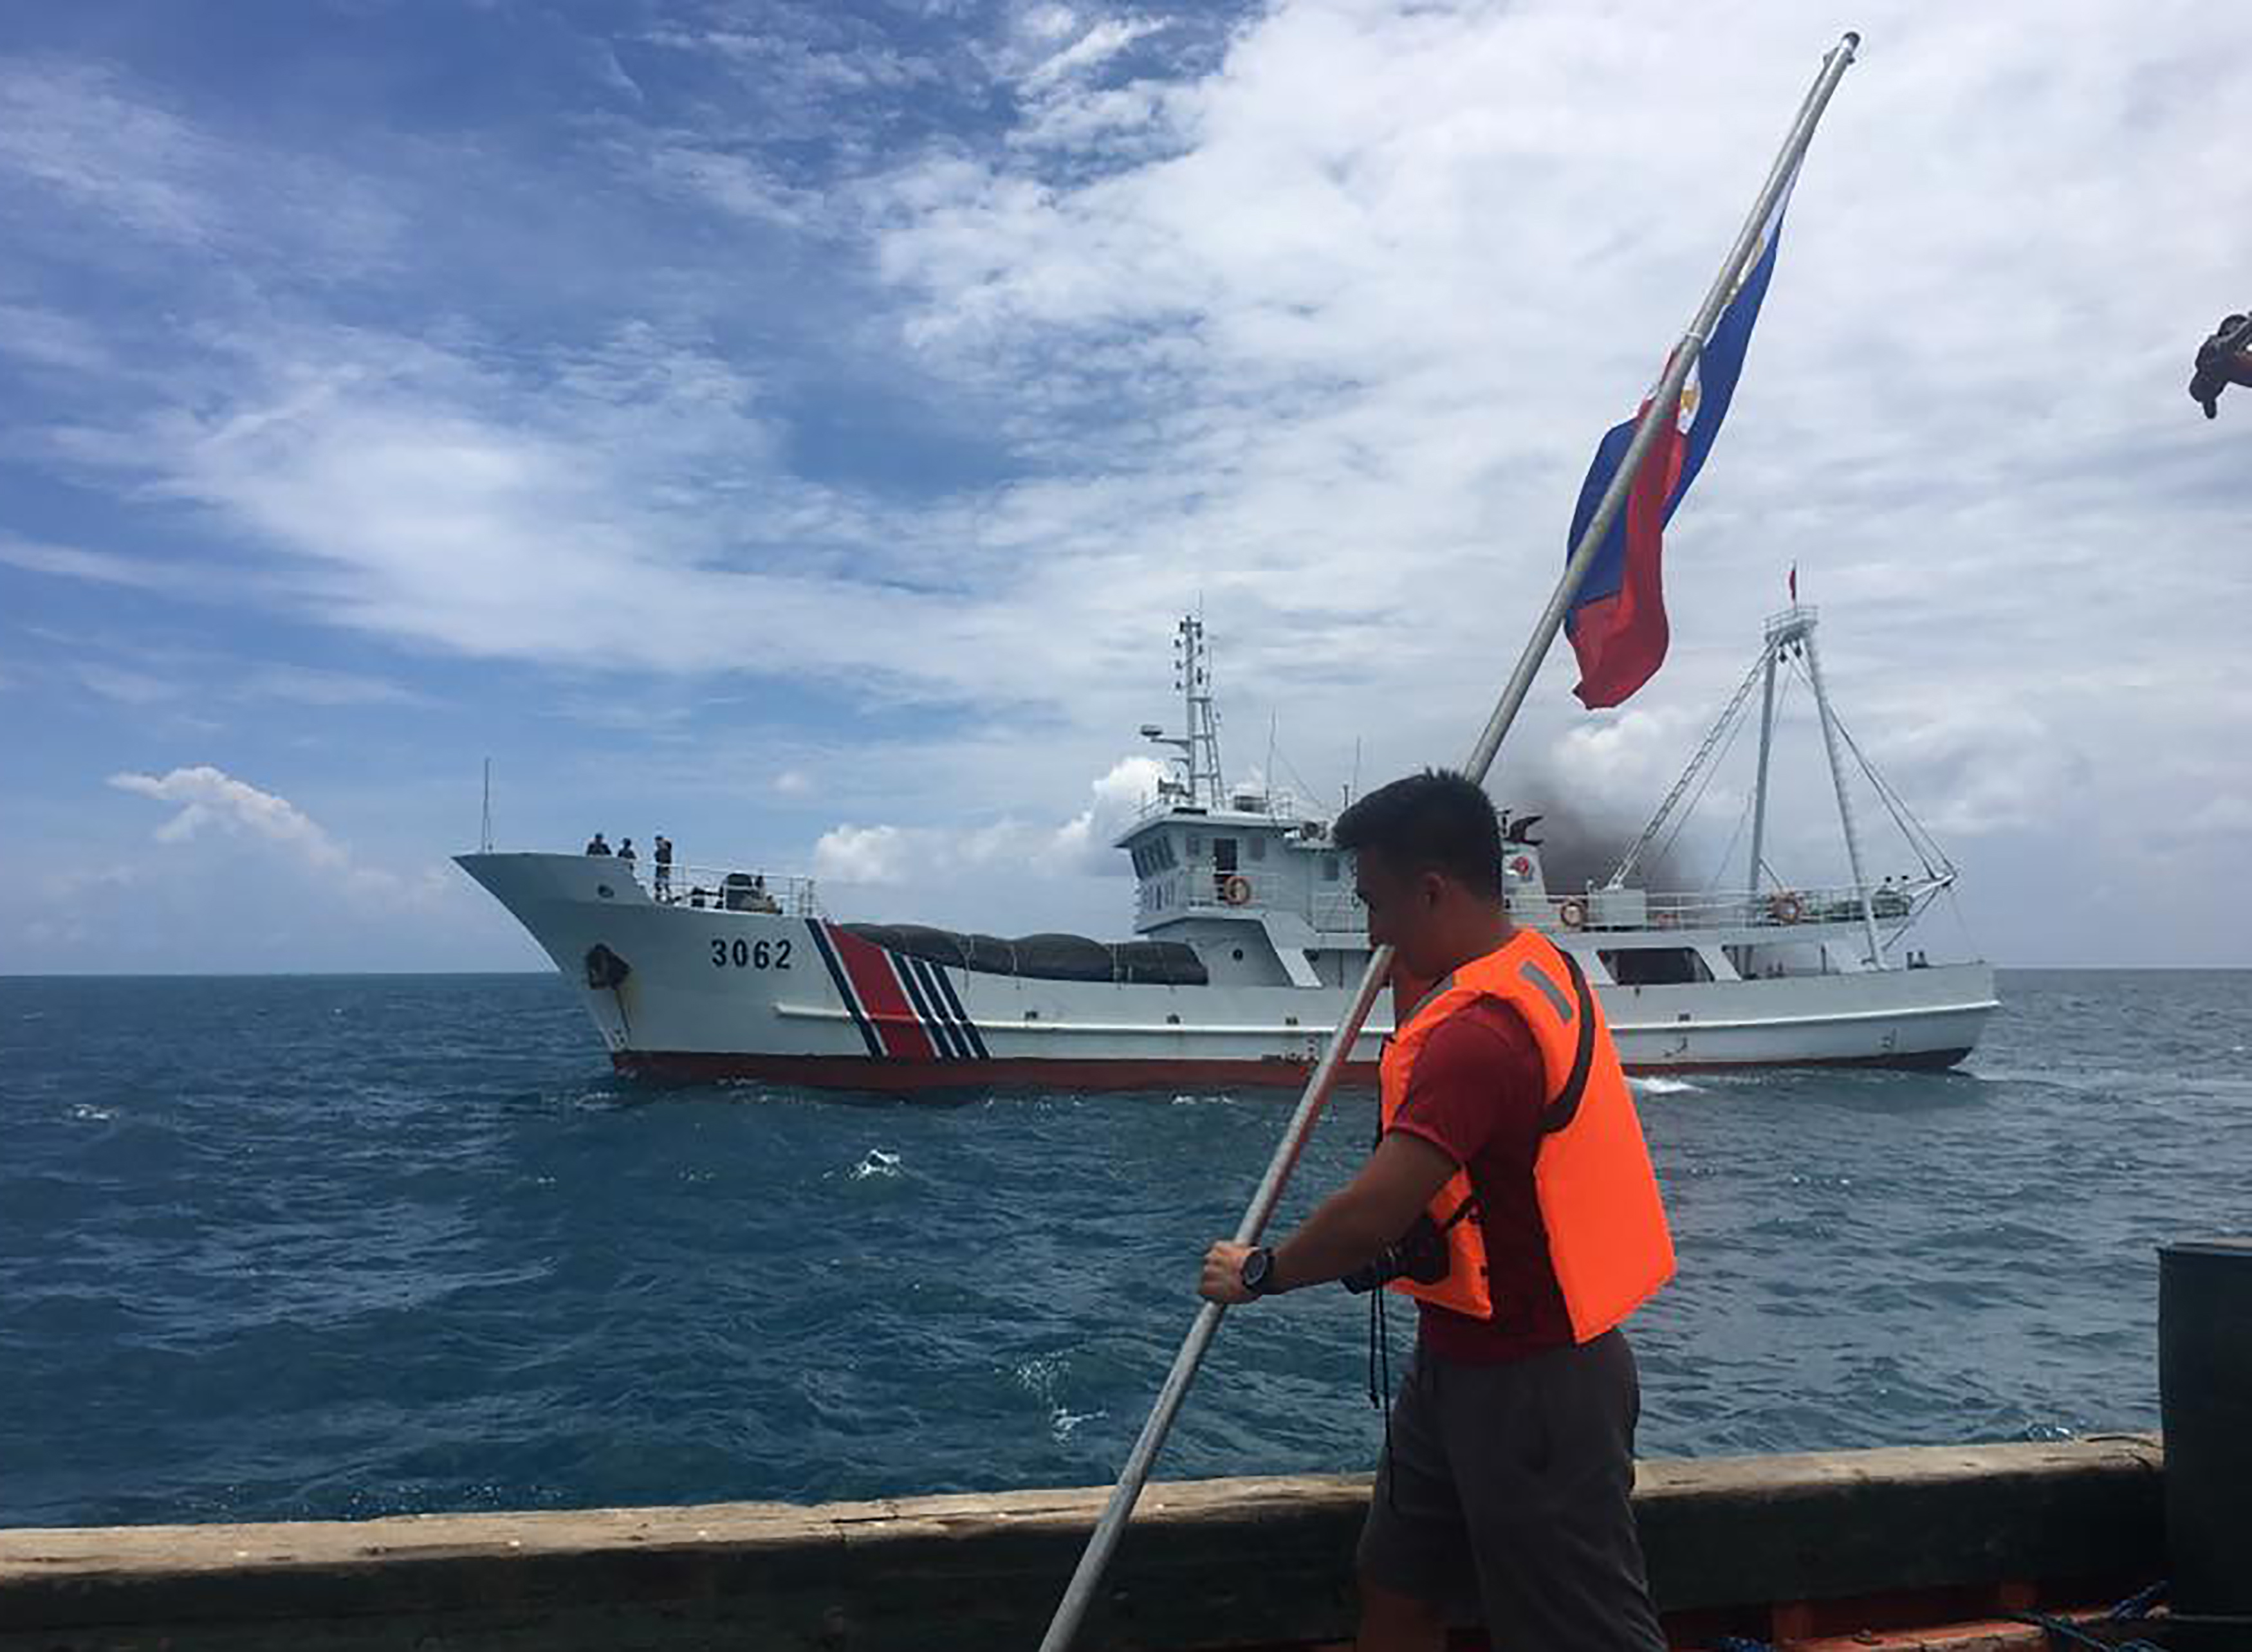 This undated handout photo taken from the Facebook account of Kalayaan Atin Ito (Kalayaan This Is Ours), a group of Filipino activists, and made available to Agence France-Presse on June 13, 2016 shows a Filipino activist holding a Philippine flag while a Chinese coast guard ship sails close by their ship at the Scarborough Shoal, just 230 kilometres (143 miles) off the main Philippine island of Luzon, in the South China Sea. Filipino protesters said on June 13, 2016 China's coast guard blocked and sprayed them with water as their small group sailed to a Chinese-controlled South China Sea shoal to mark Philippine independence day. / AFP PHOTO / KALAYAAN ATIN TIO / STR / -----EDITORS NOTE --- RESTRICTED TO EDITORIAL USE - MANDATORY CREDIT "AFP PHOTO / KALAYAAN ATIN TIO" - NO MARKETING - NO ADVERTISING CAMPAIGNS - DISTRIBUTED AS A SERVICE TO CLIENTS - NO ARCHIVES